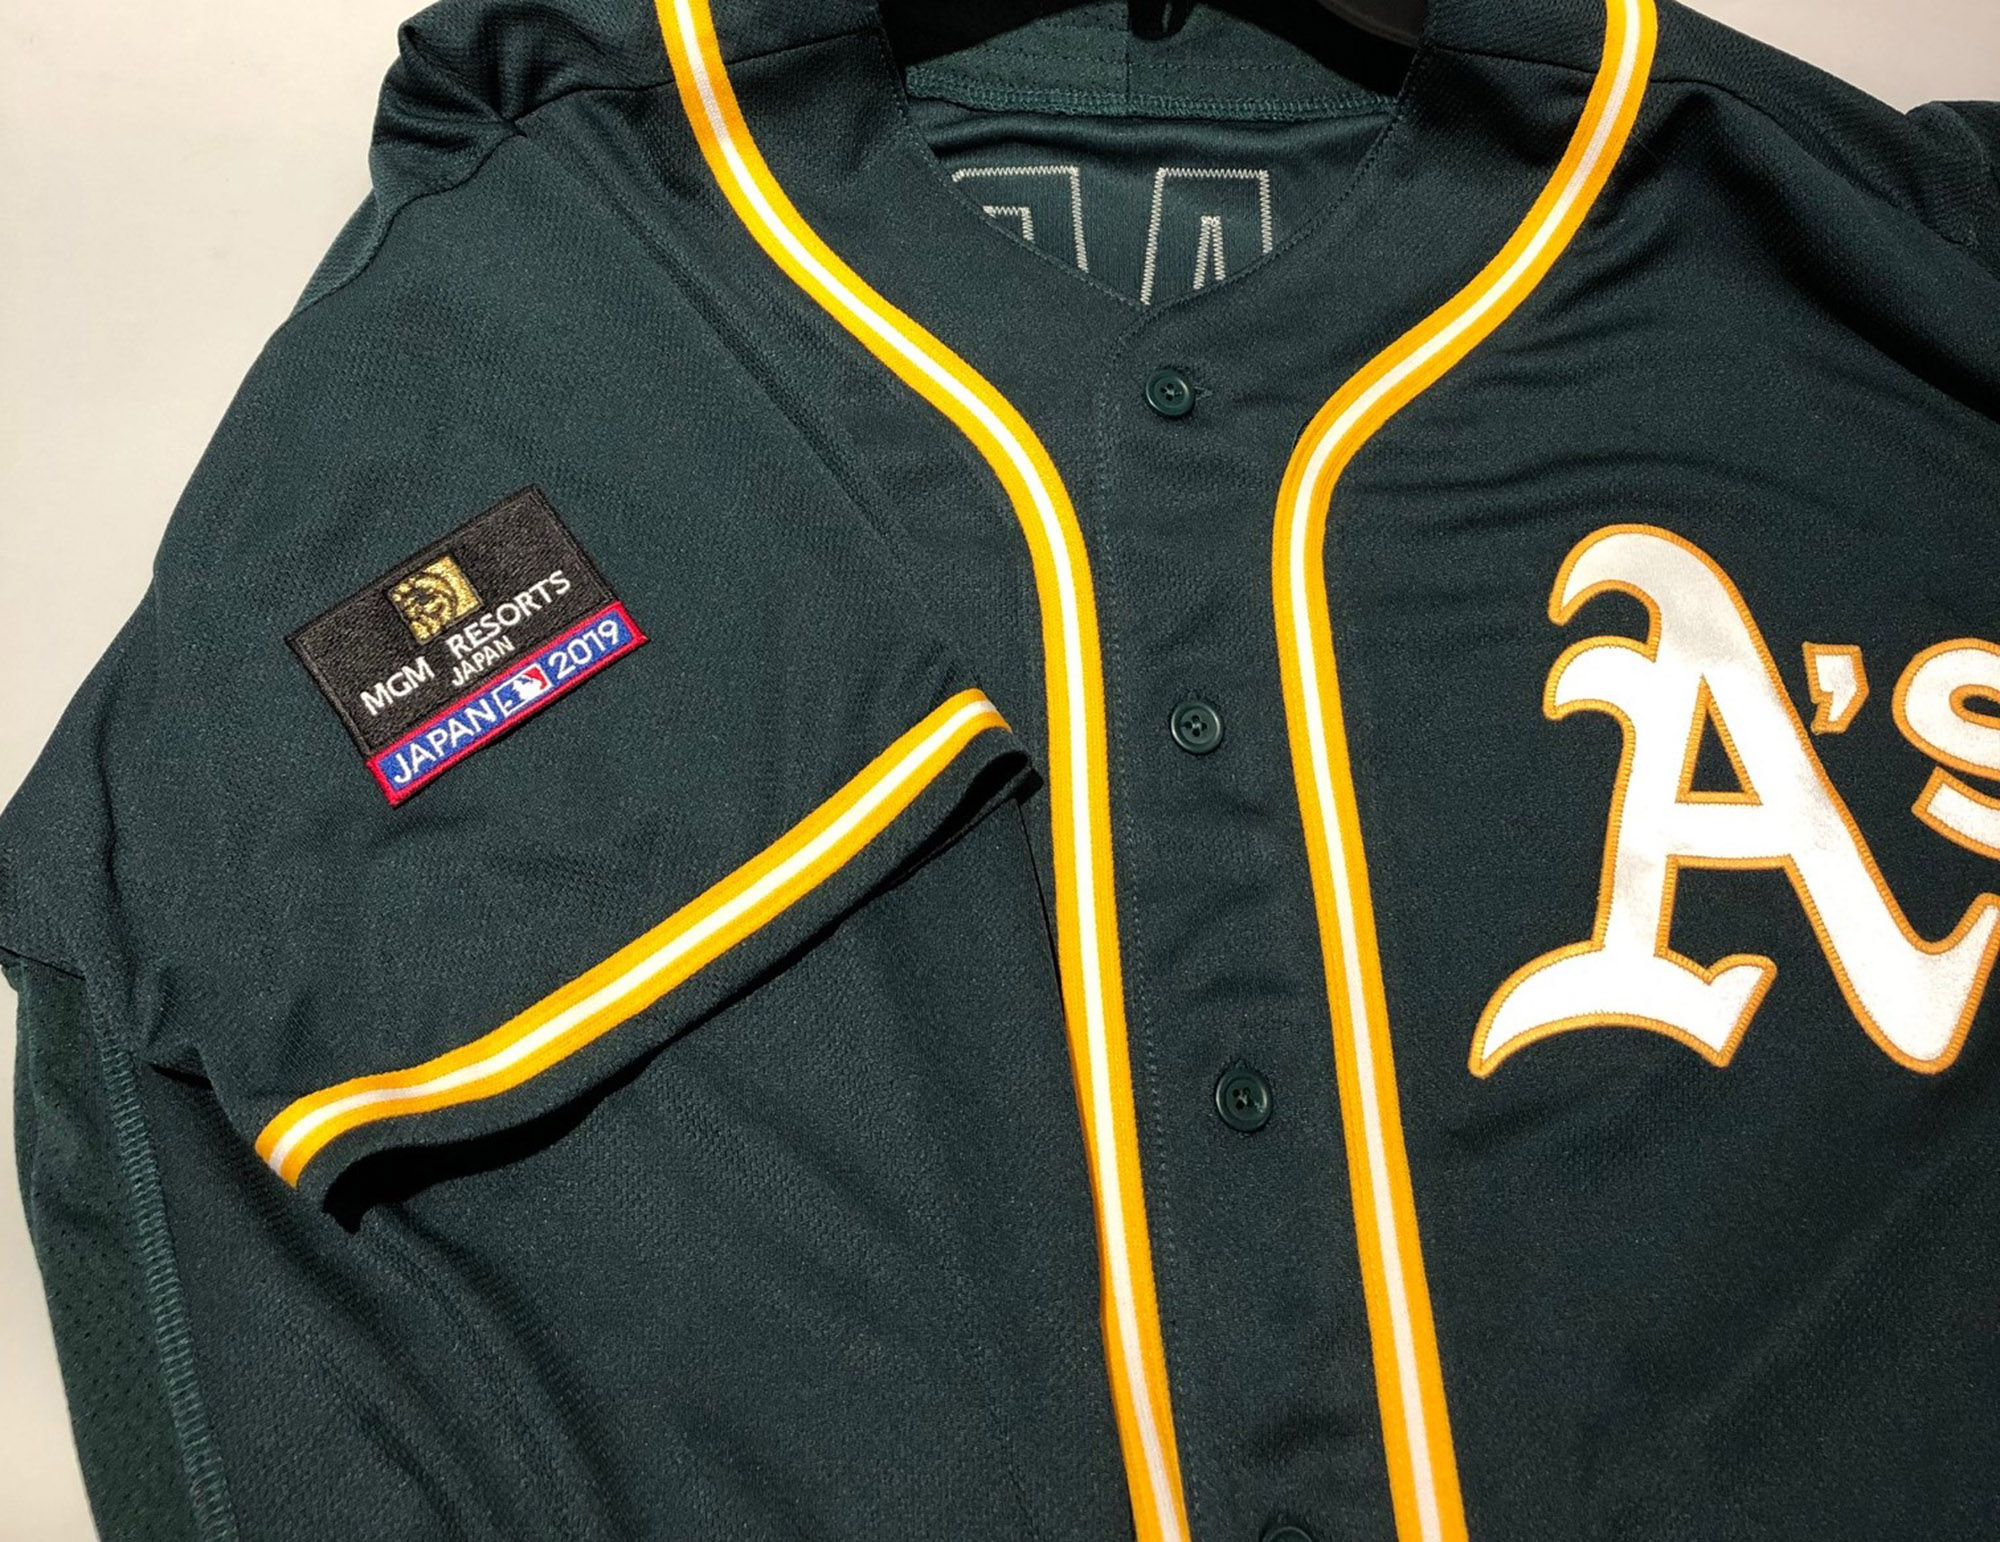 Major League Players Will Wear MGM Patches During Games in Japan - Bloomberg